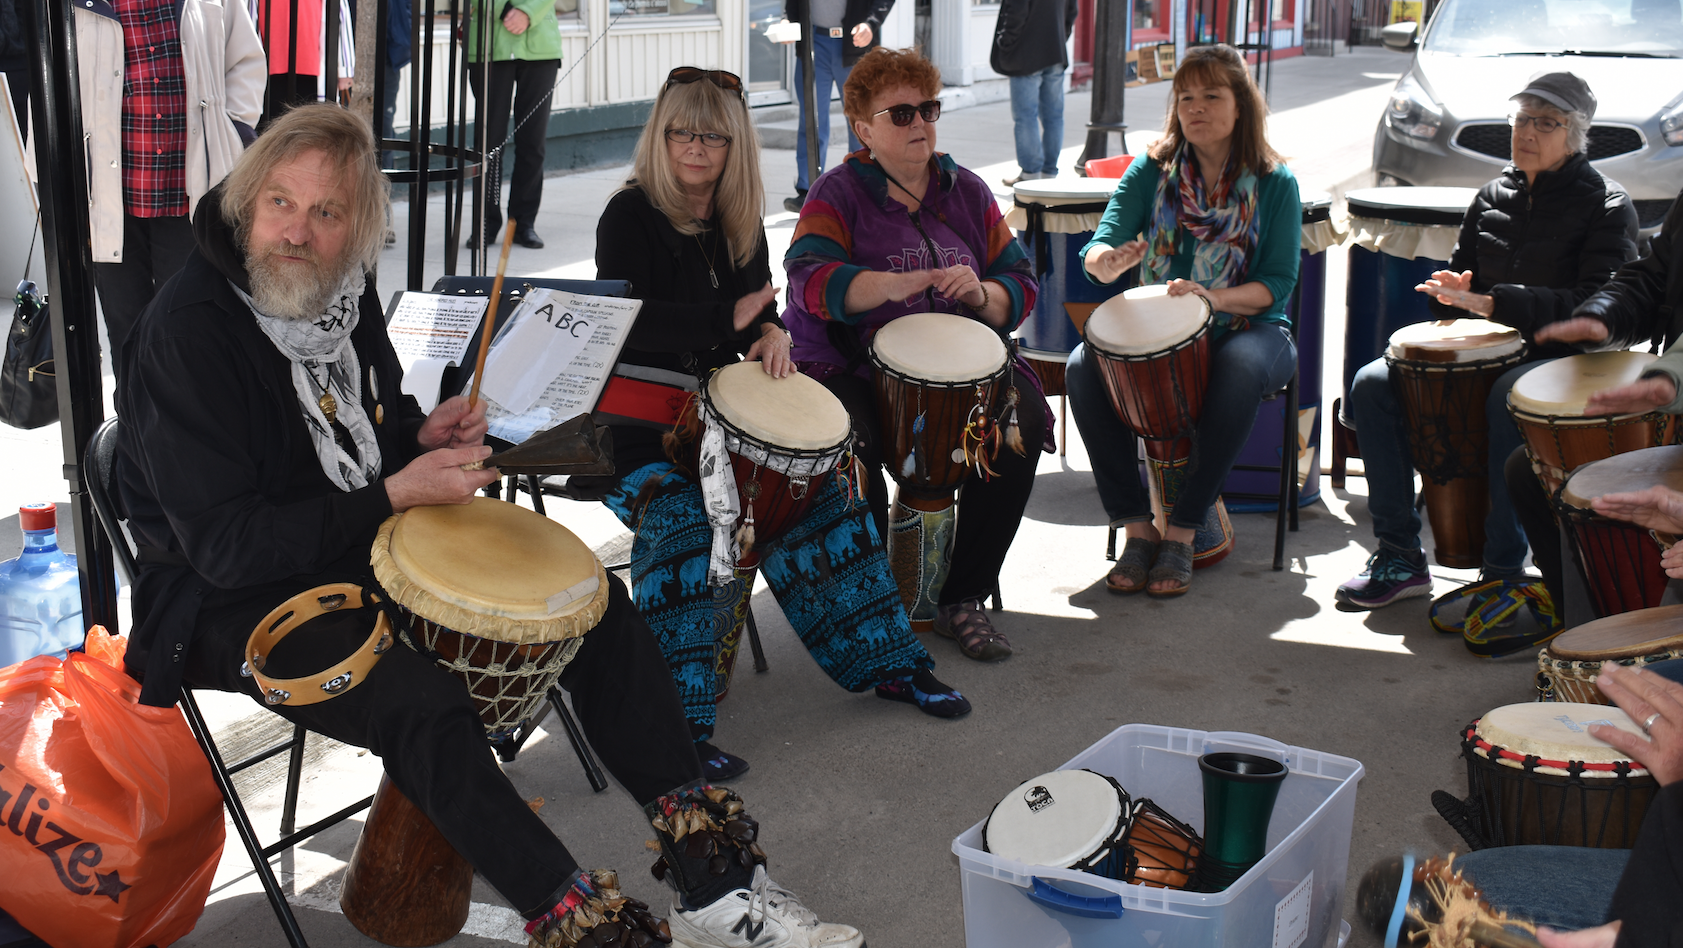 <p>POWERFUL BEAT- (Left) Ottawa-based drummer Jack Pyl leads community members in a drumming circle Saturday afternoon at the 10th anniversary of the opening of the Ten Thousand Villages store in Picton. (Sarah Williams/Gazette Staff)</p>
